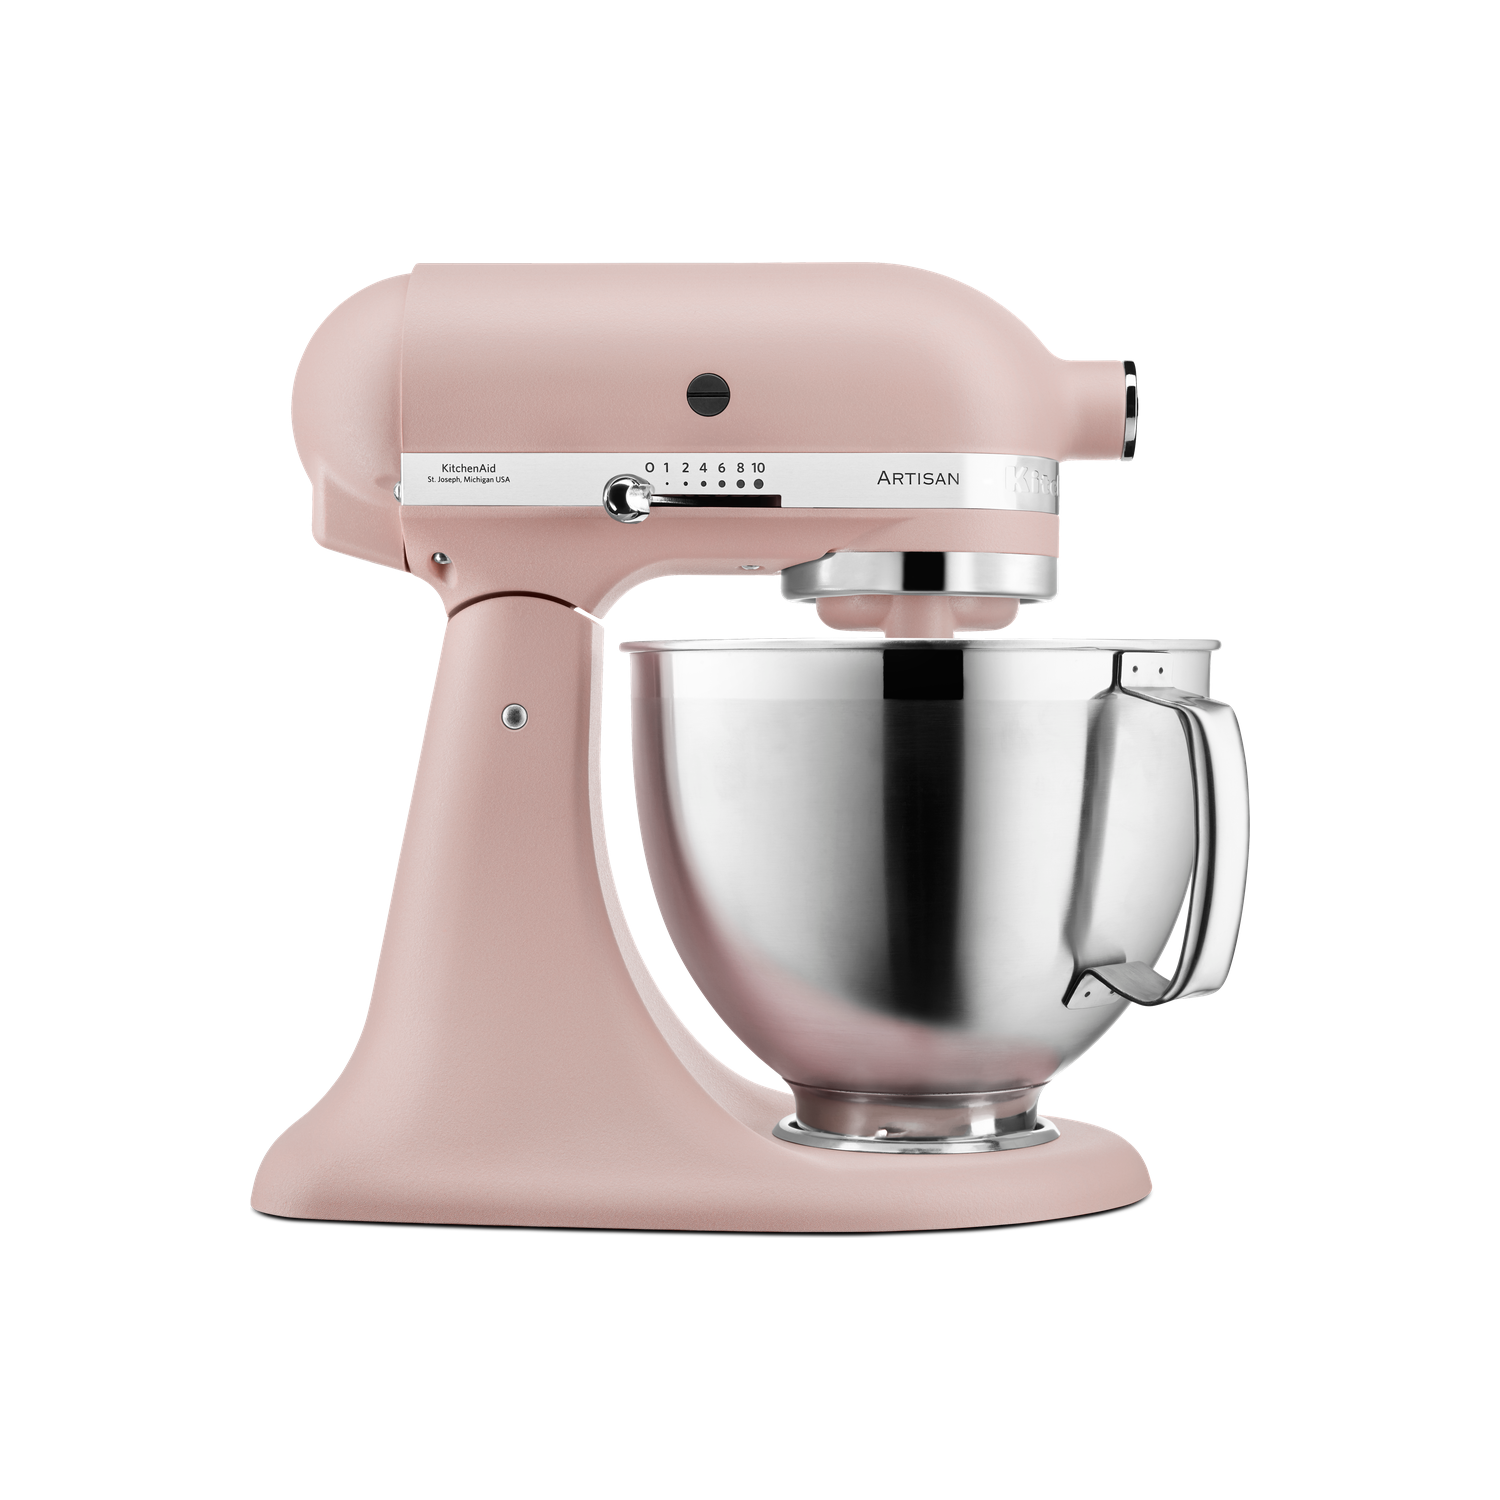 Refurbished KitchenAid Artisan Stand Mixer with Two-tone 4.8L & 3L Bowls in Pink